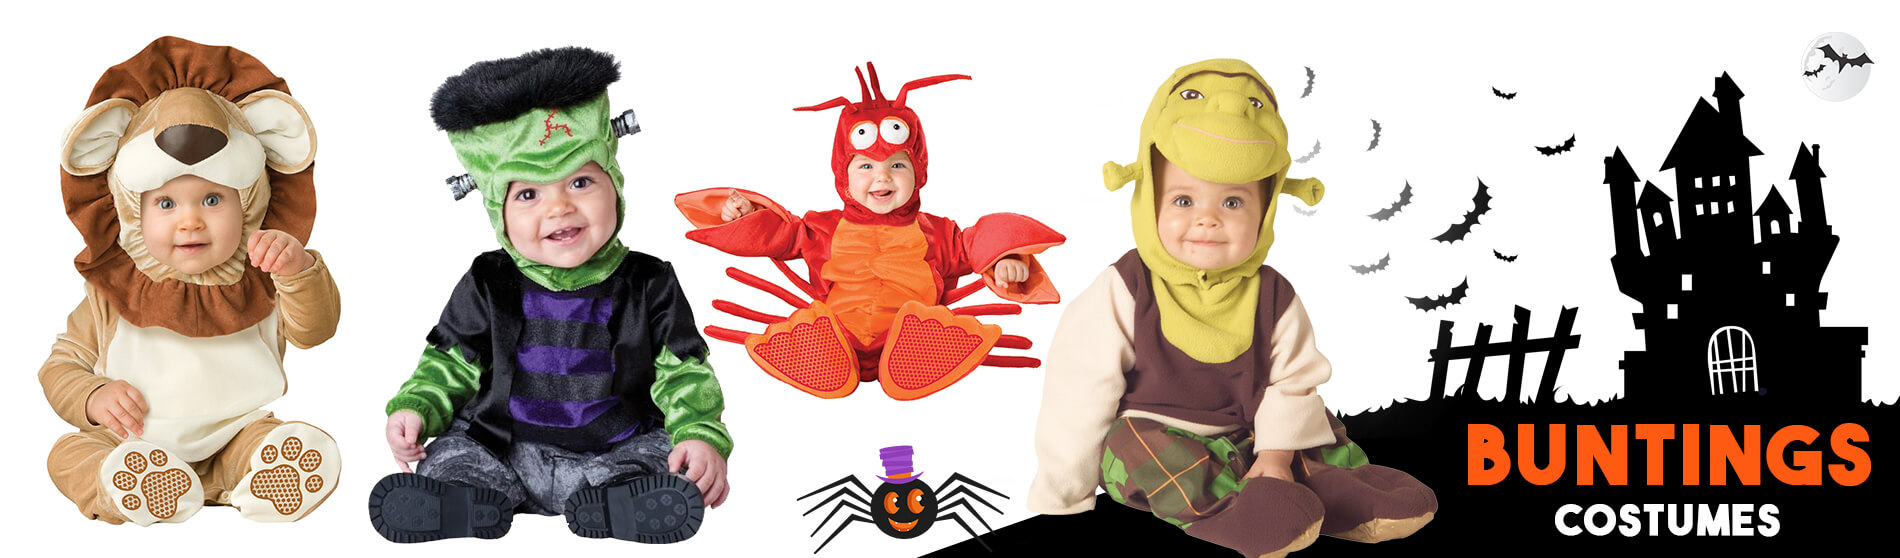 Glendale Halloween : Glendale-Costumes-Buntings-Design-for-Toddlers1